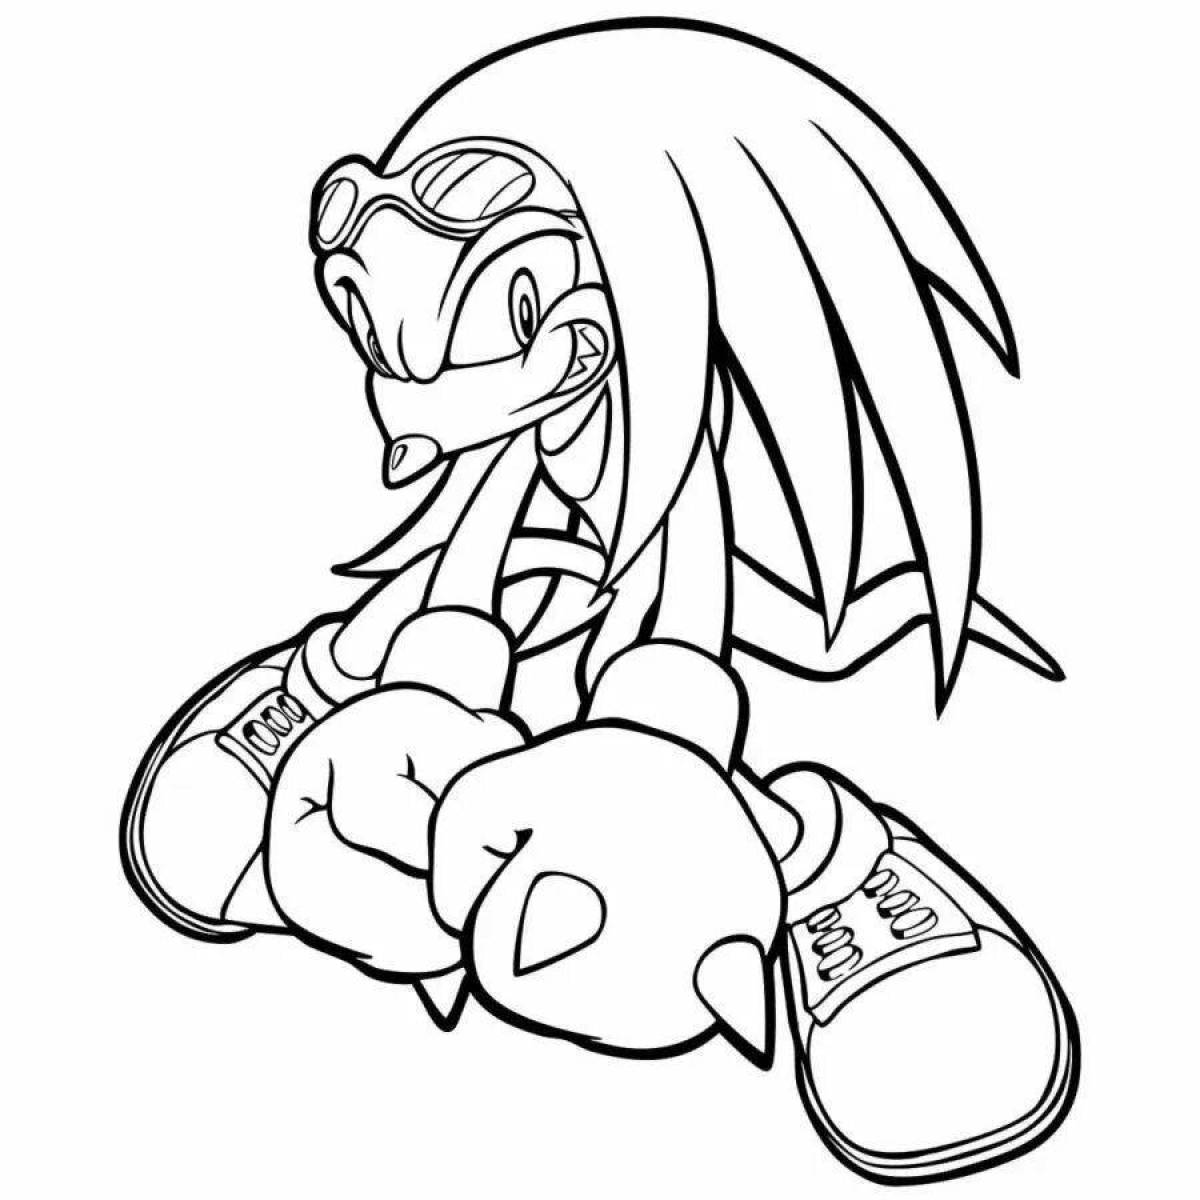 Dazzling knuckles and rouge coloring book